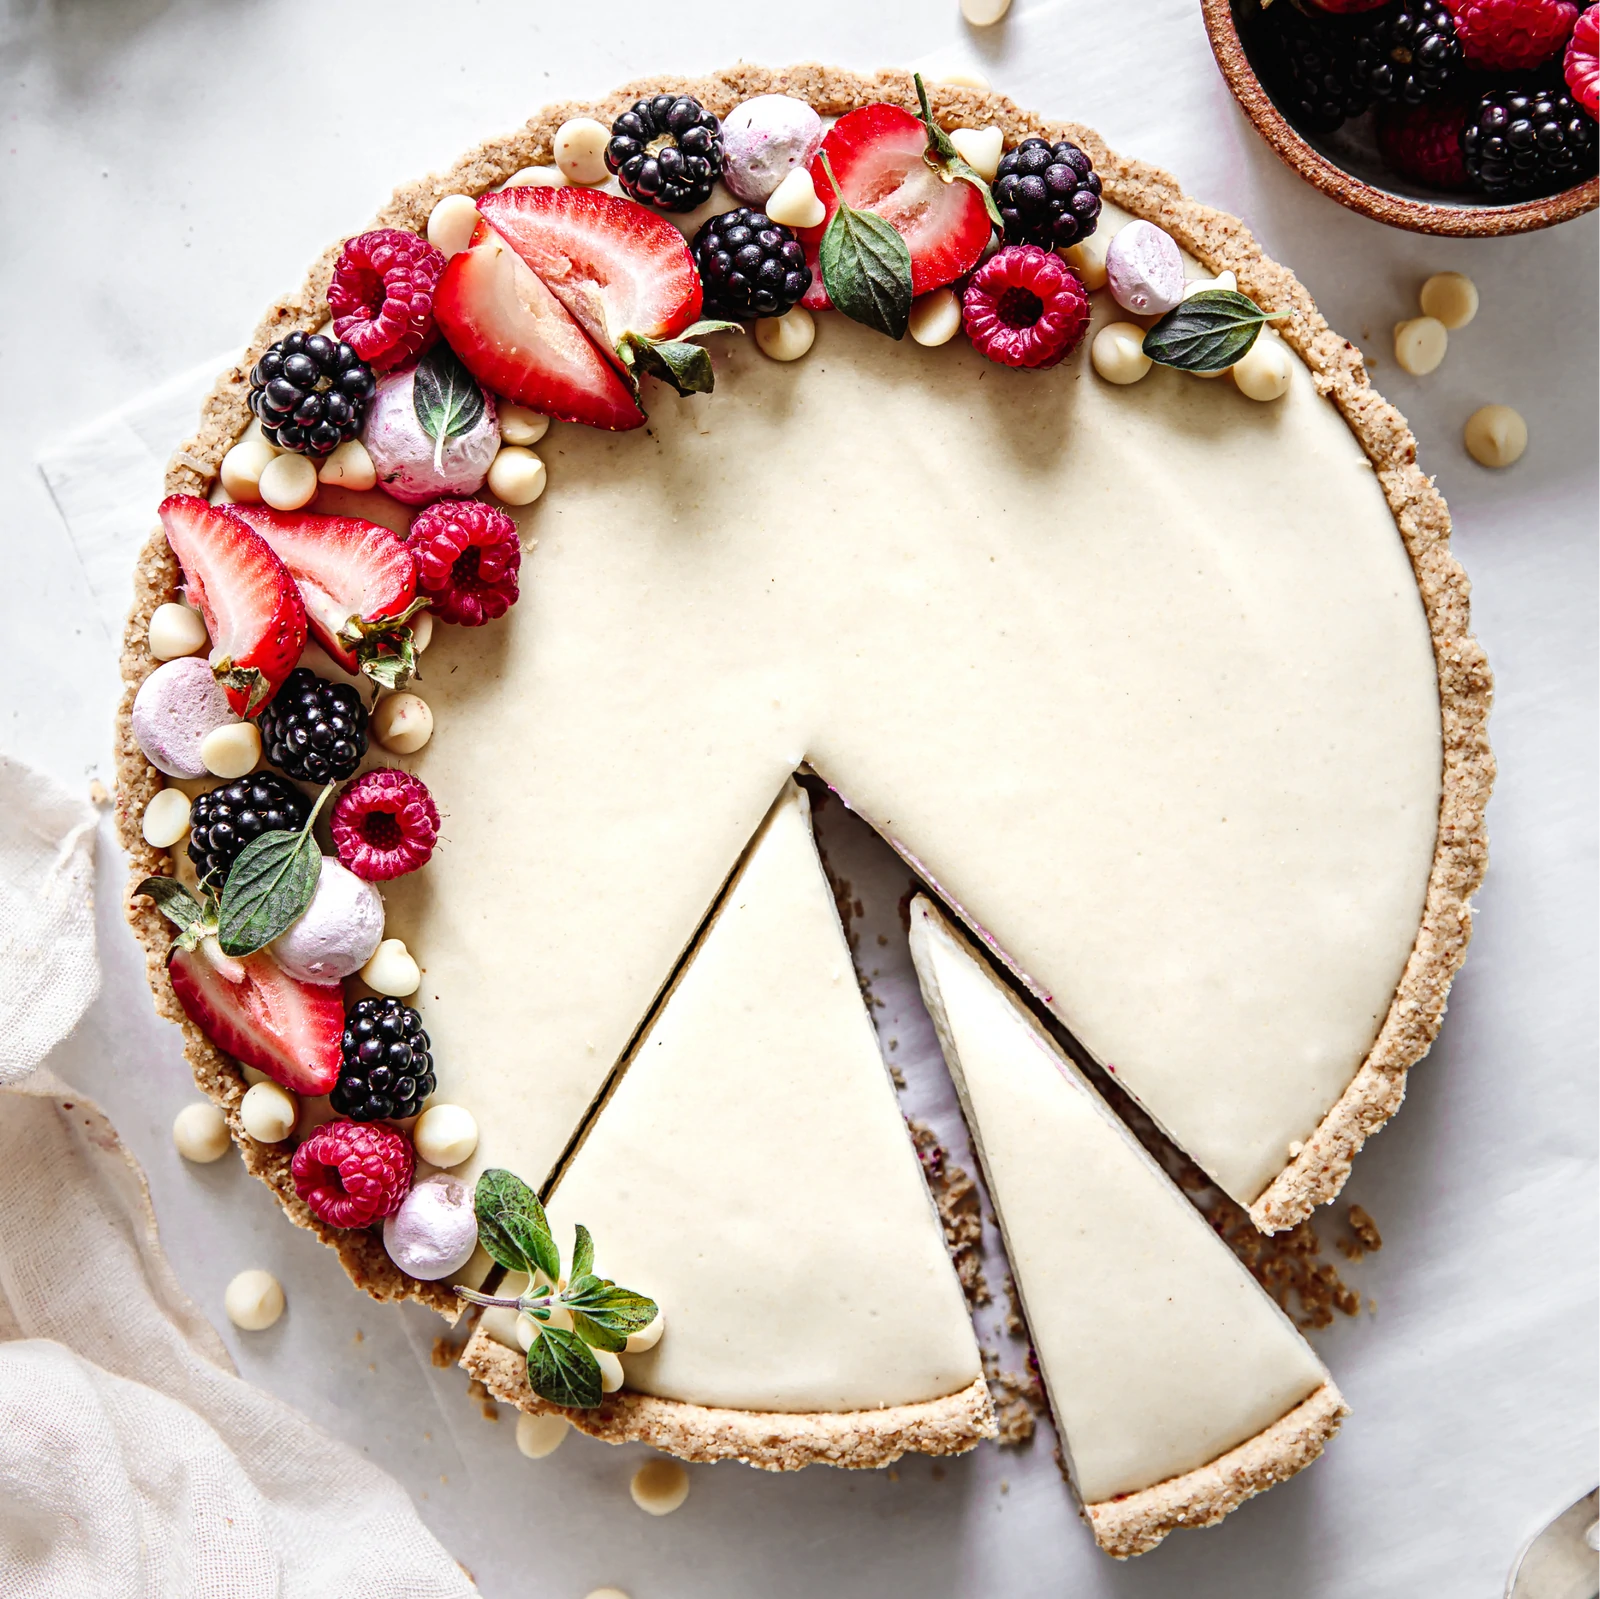 Almond Cow's White Chocolate Berry Tart garnished with fresh berries